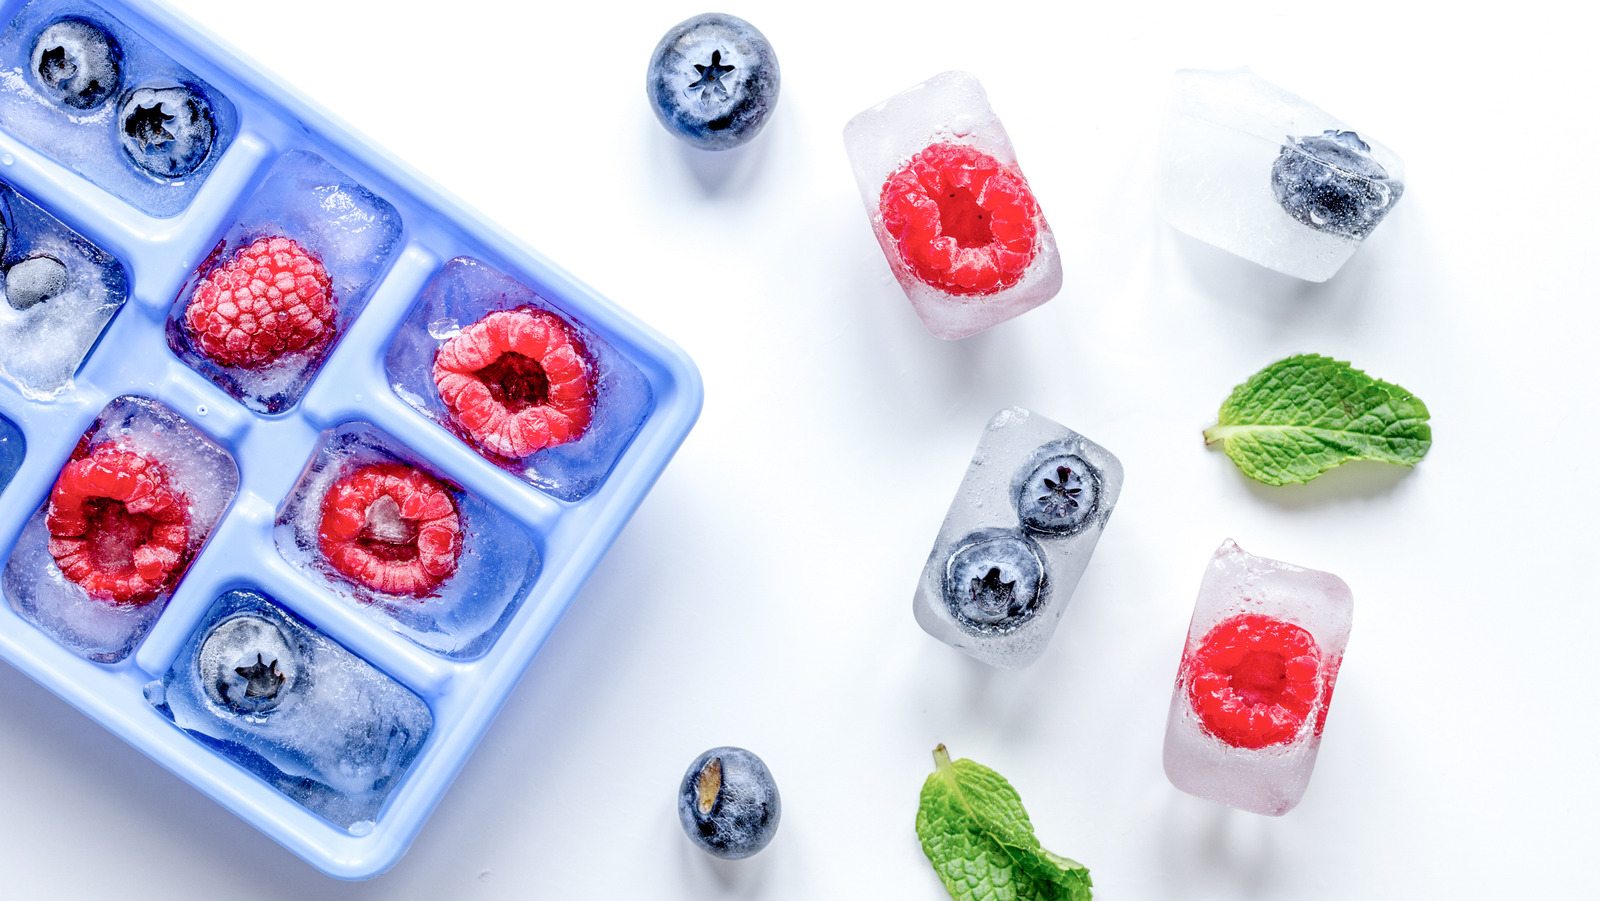 https://www.tastingtable.com/img/gallery/the-absolute-best-uses-for-ice-cube-trays/l-intro-1654109822.jpg